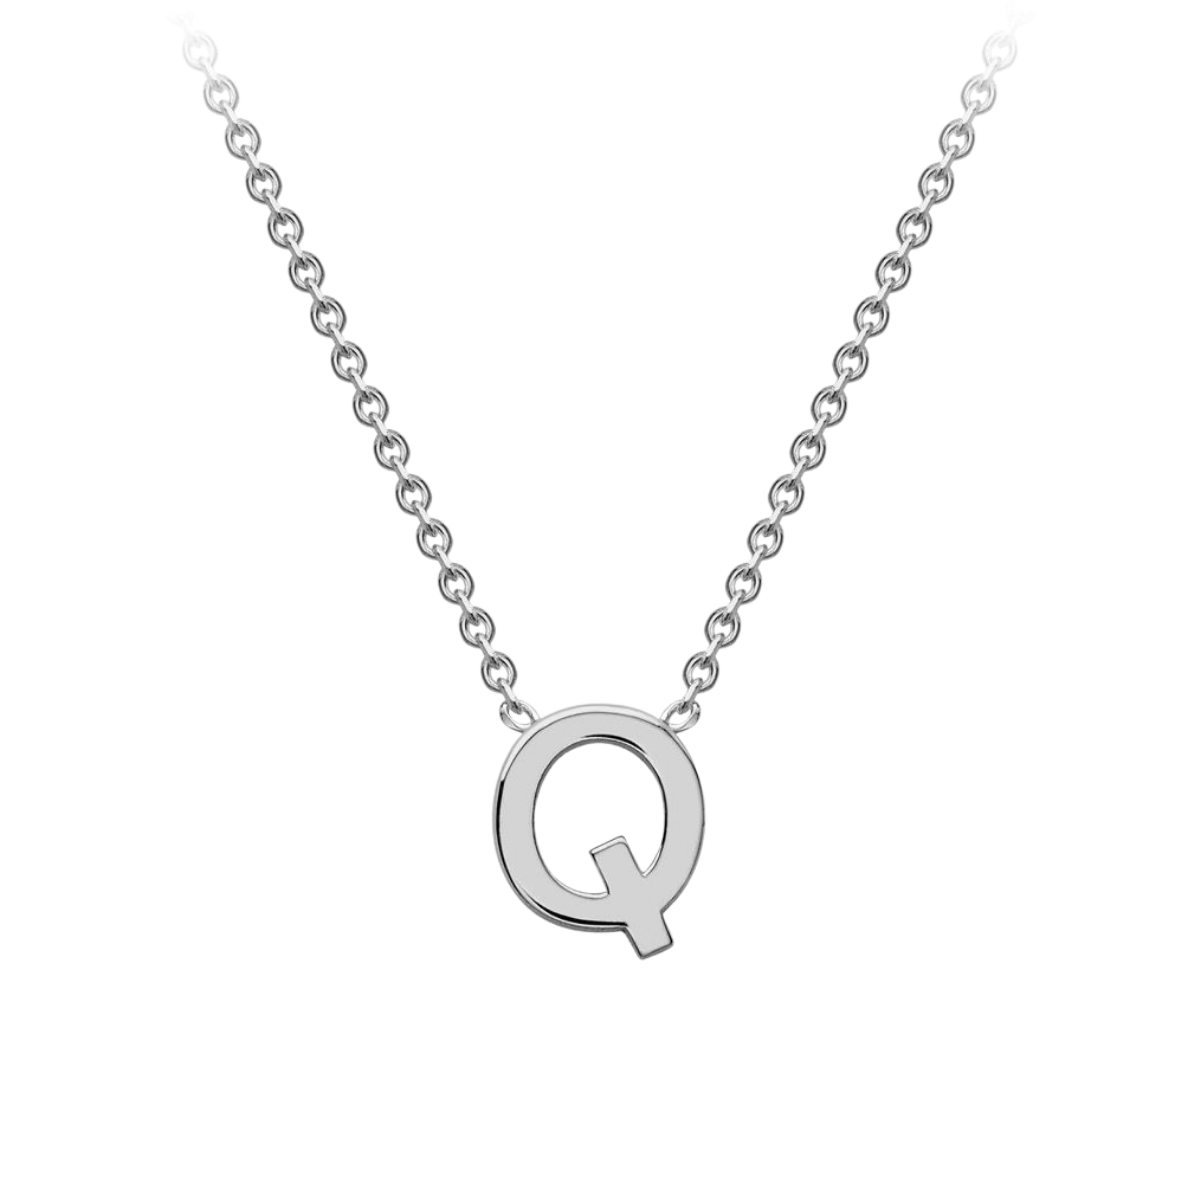 PETITE 'Q' INITIAL NECKLACE | 9K SOLID WHITE GOLD